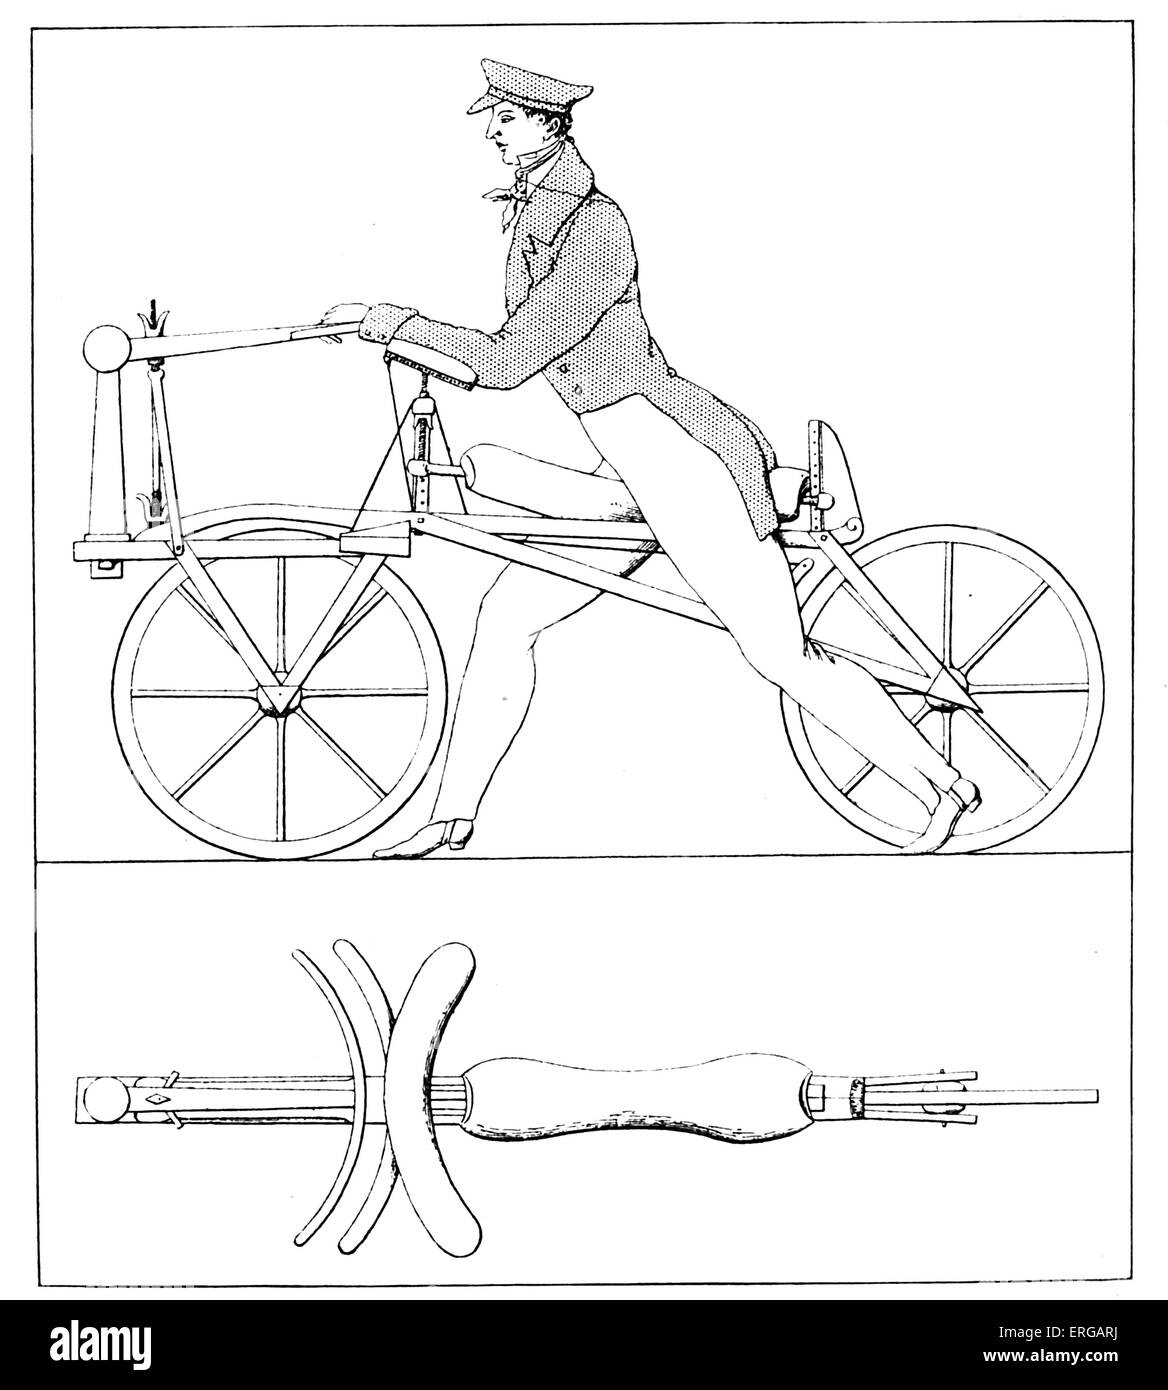 First dandy horse or hobby horse (French: draisienne or draisine or velocipede), two-wheeled man-powered vehicle -  the Stock Photo